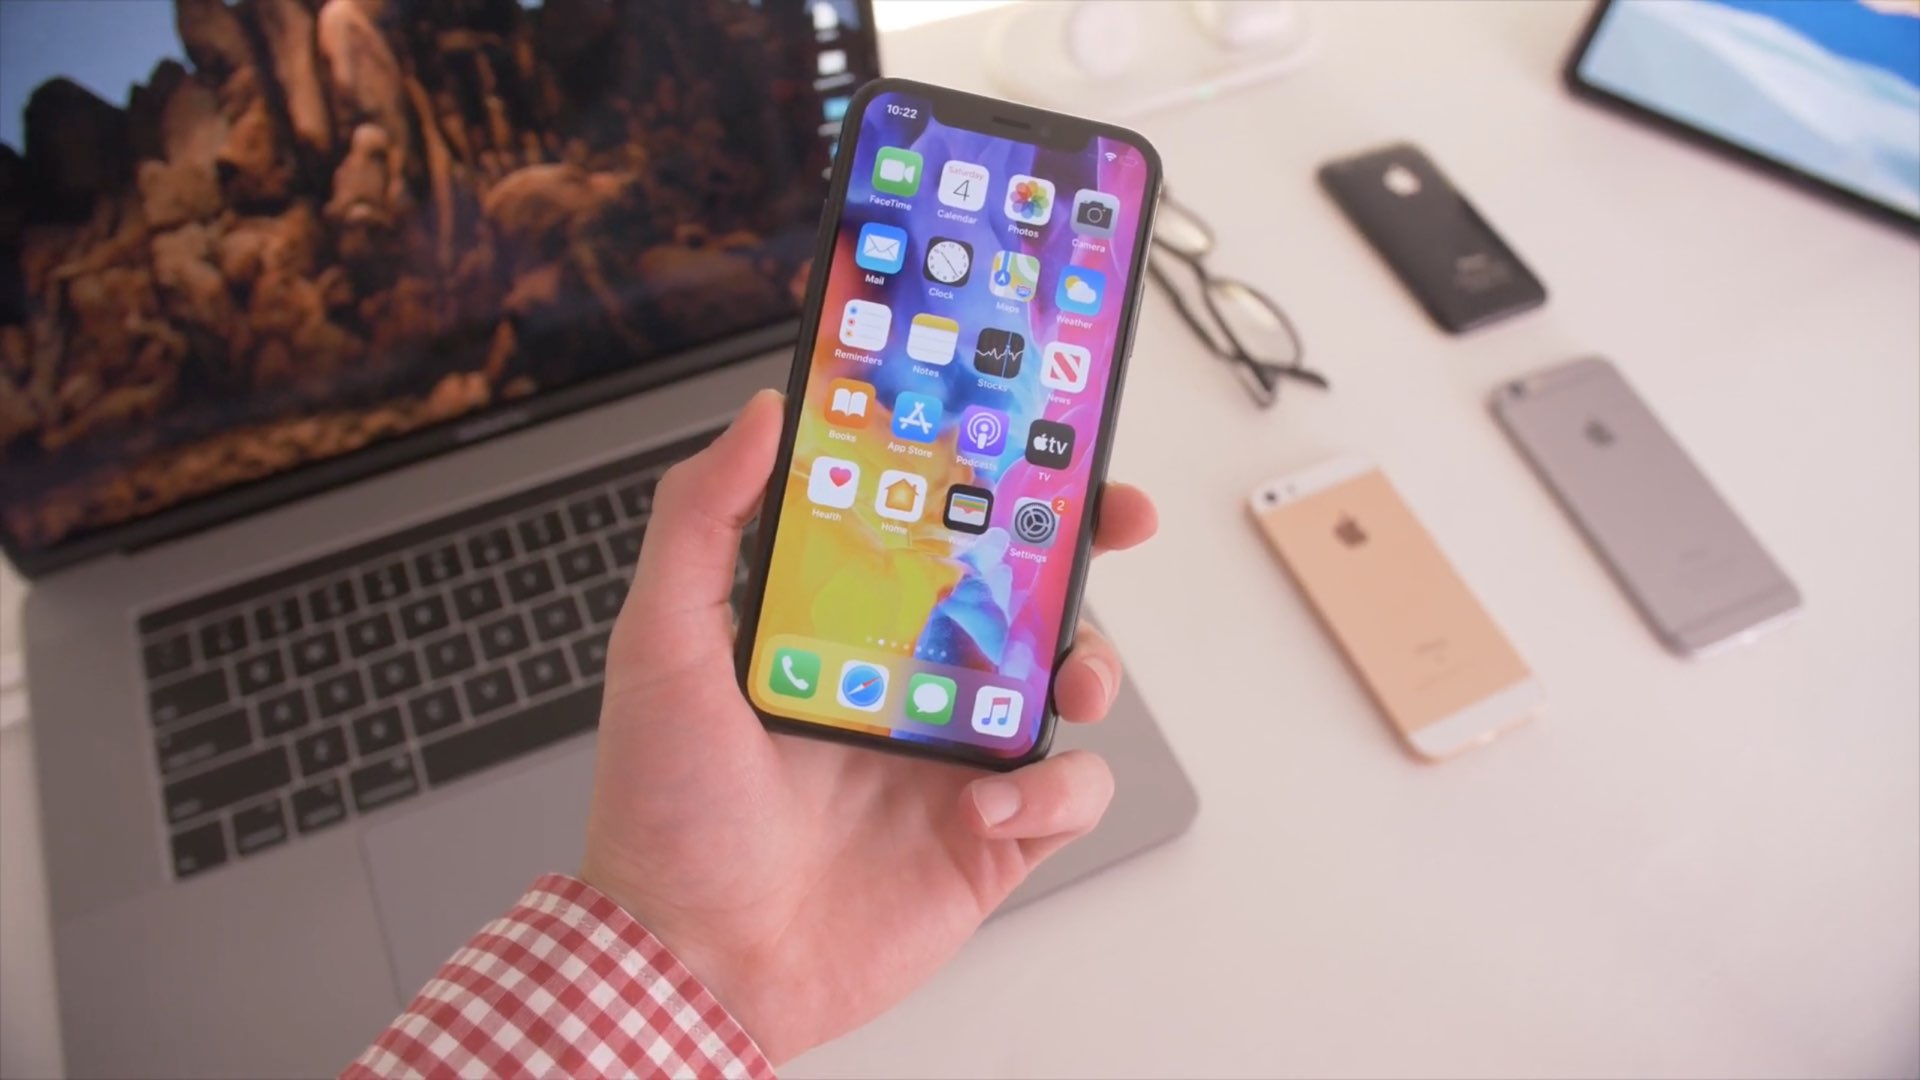 An iPhone XS held in hand with the Home Screen shown on the display